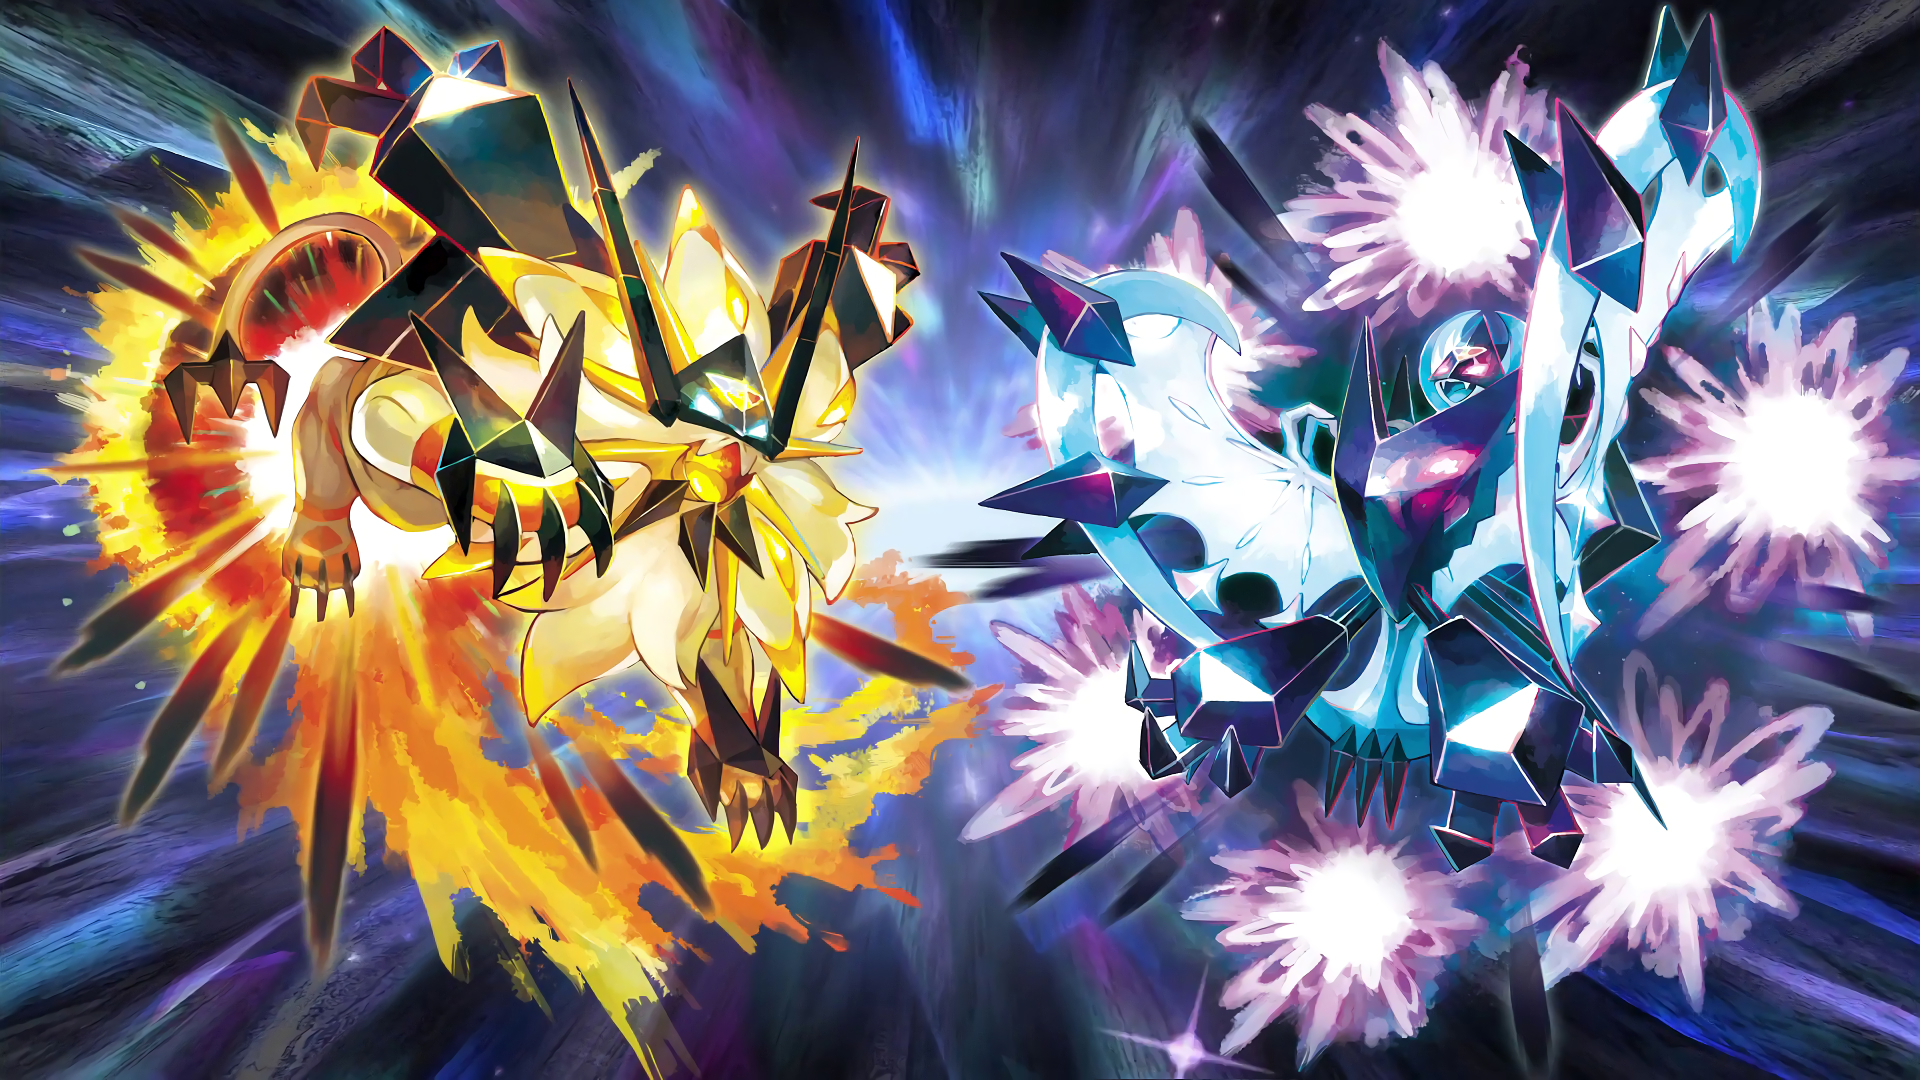 Pokãmon ultra sun and ultra moon hd papers and backgrounds